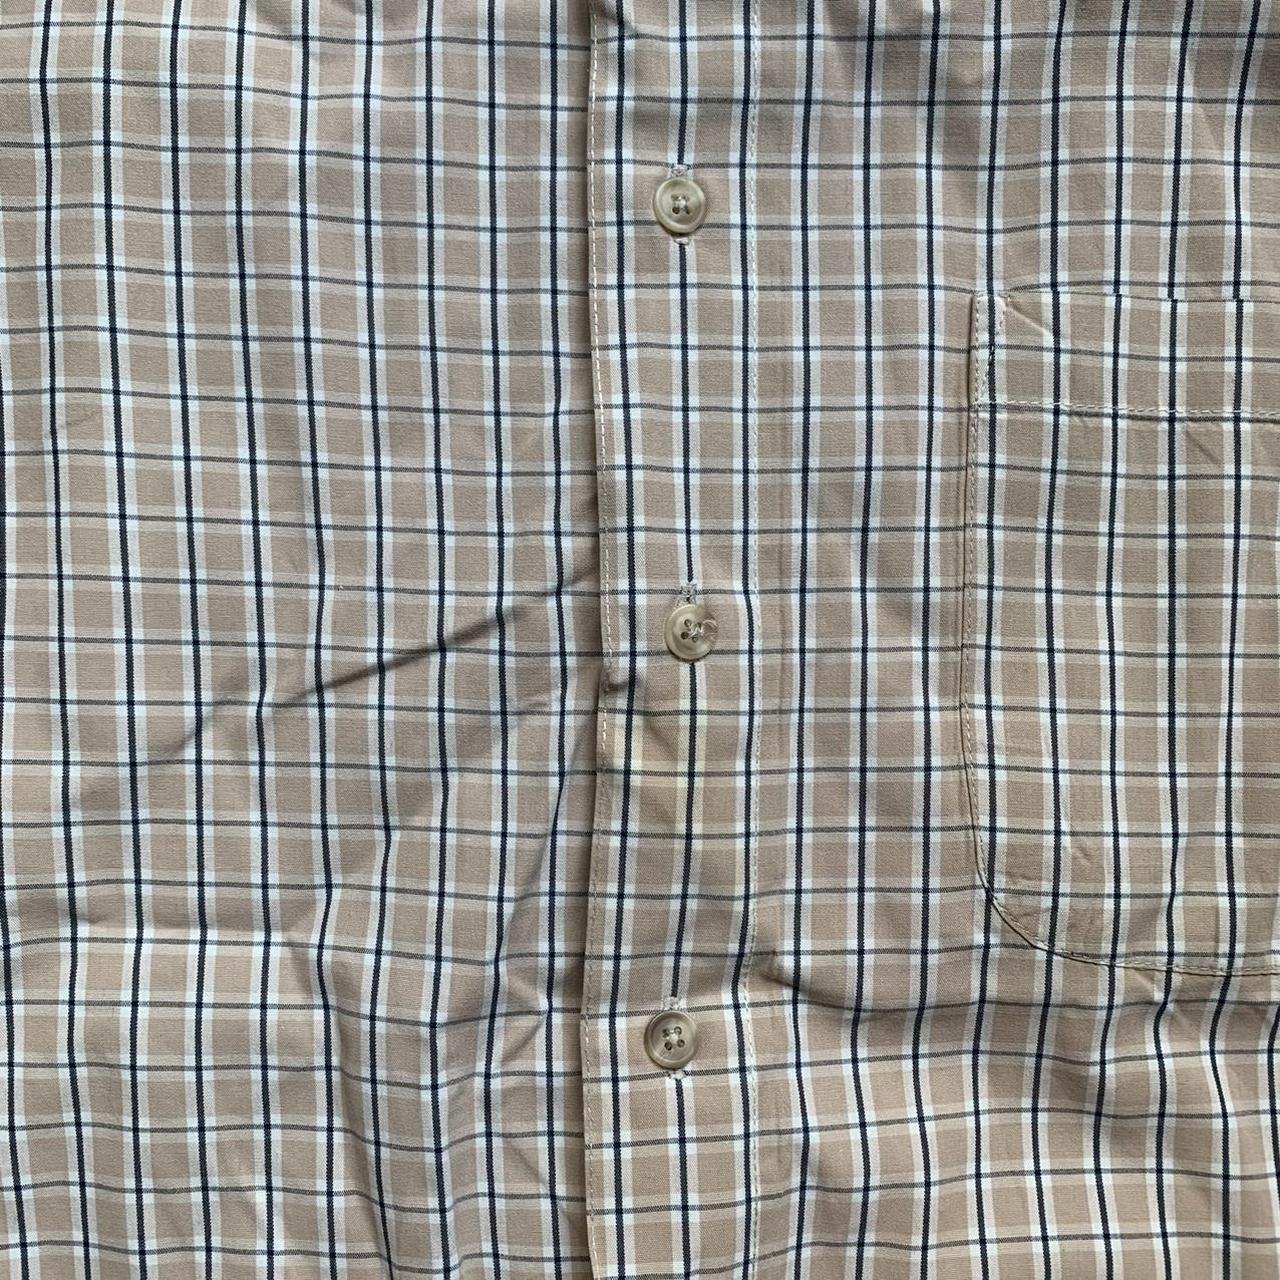 Product Image 2 - Tan Plaid Buttondown 🐌

•Great condition